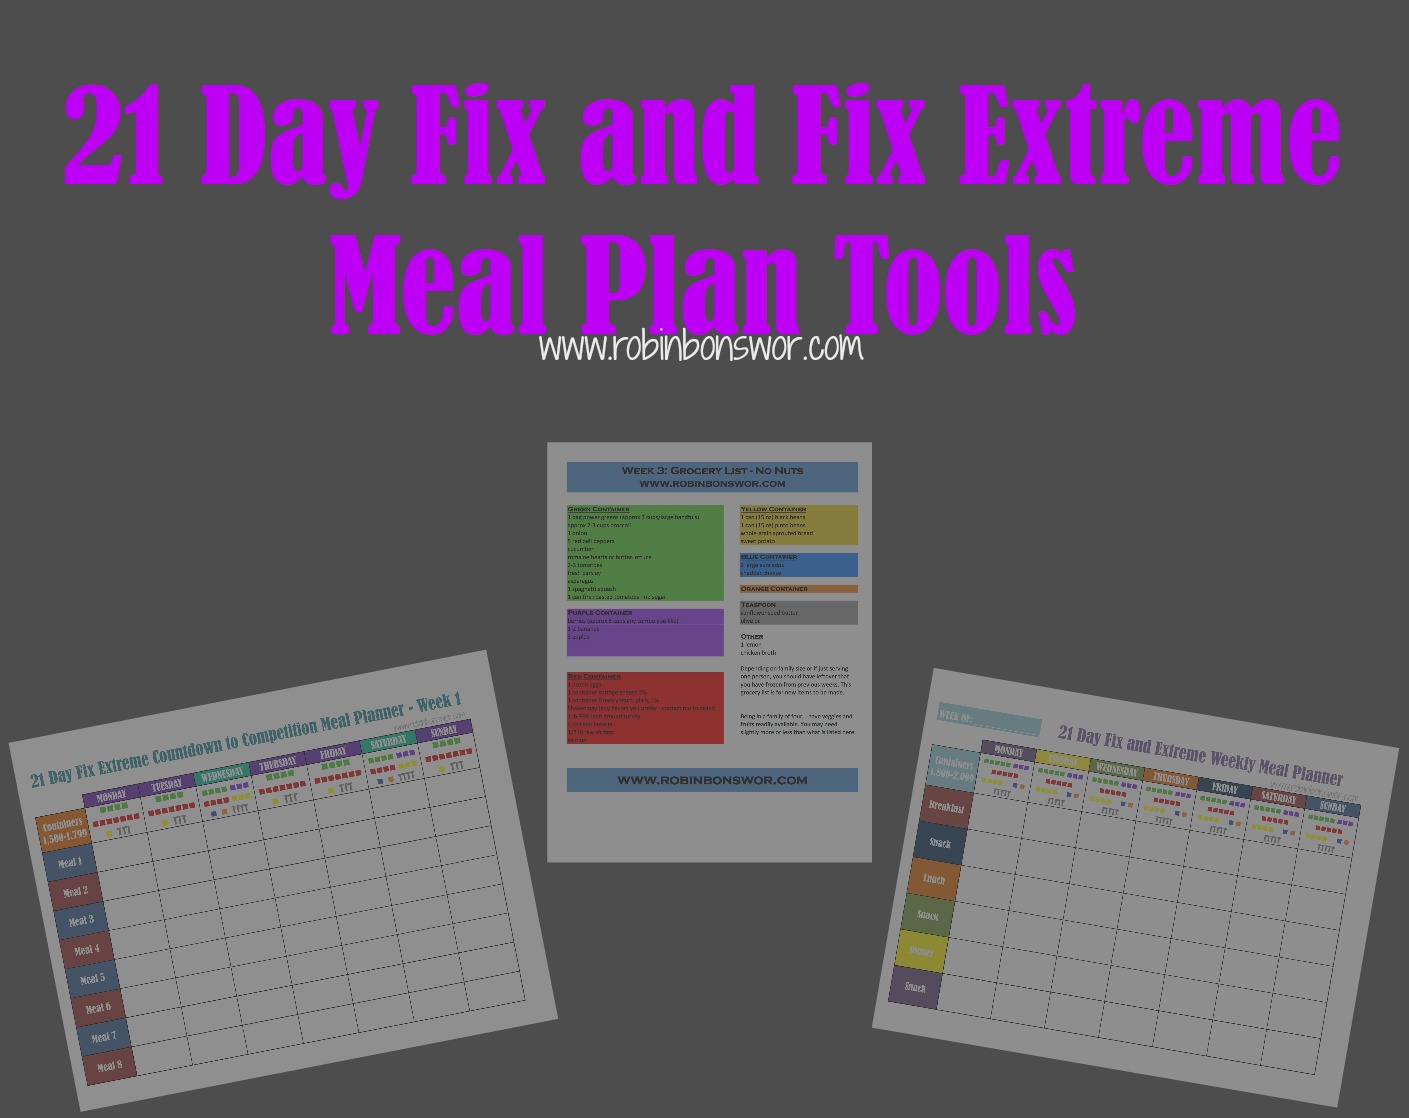 Coach Monica's FREE Portion Fix / 21 Day Fix Meal Plan & Tools